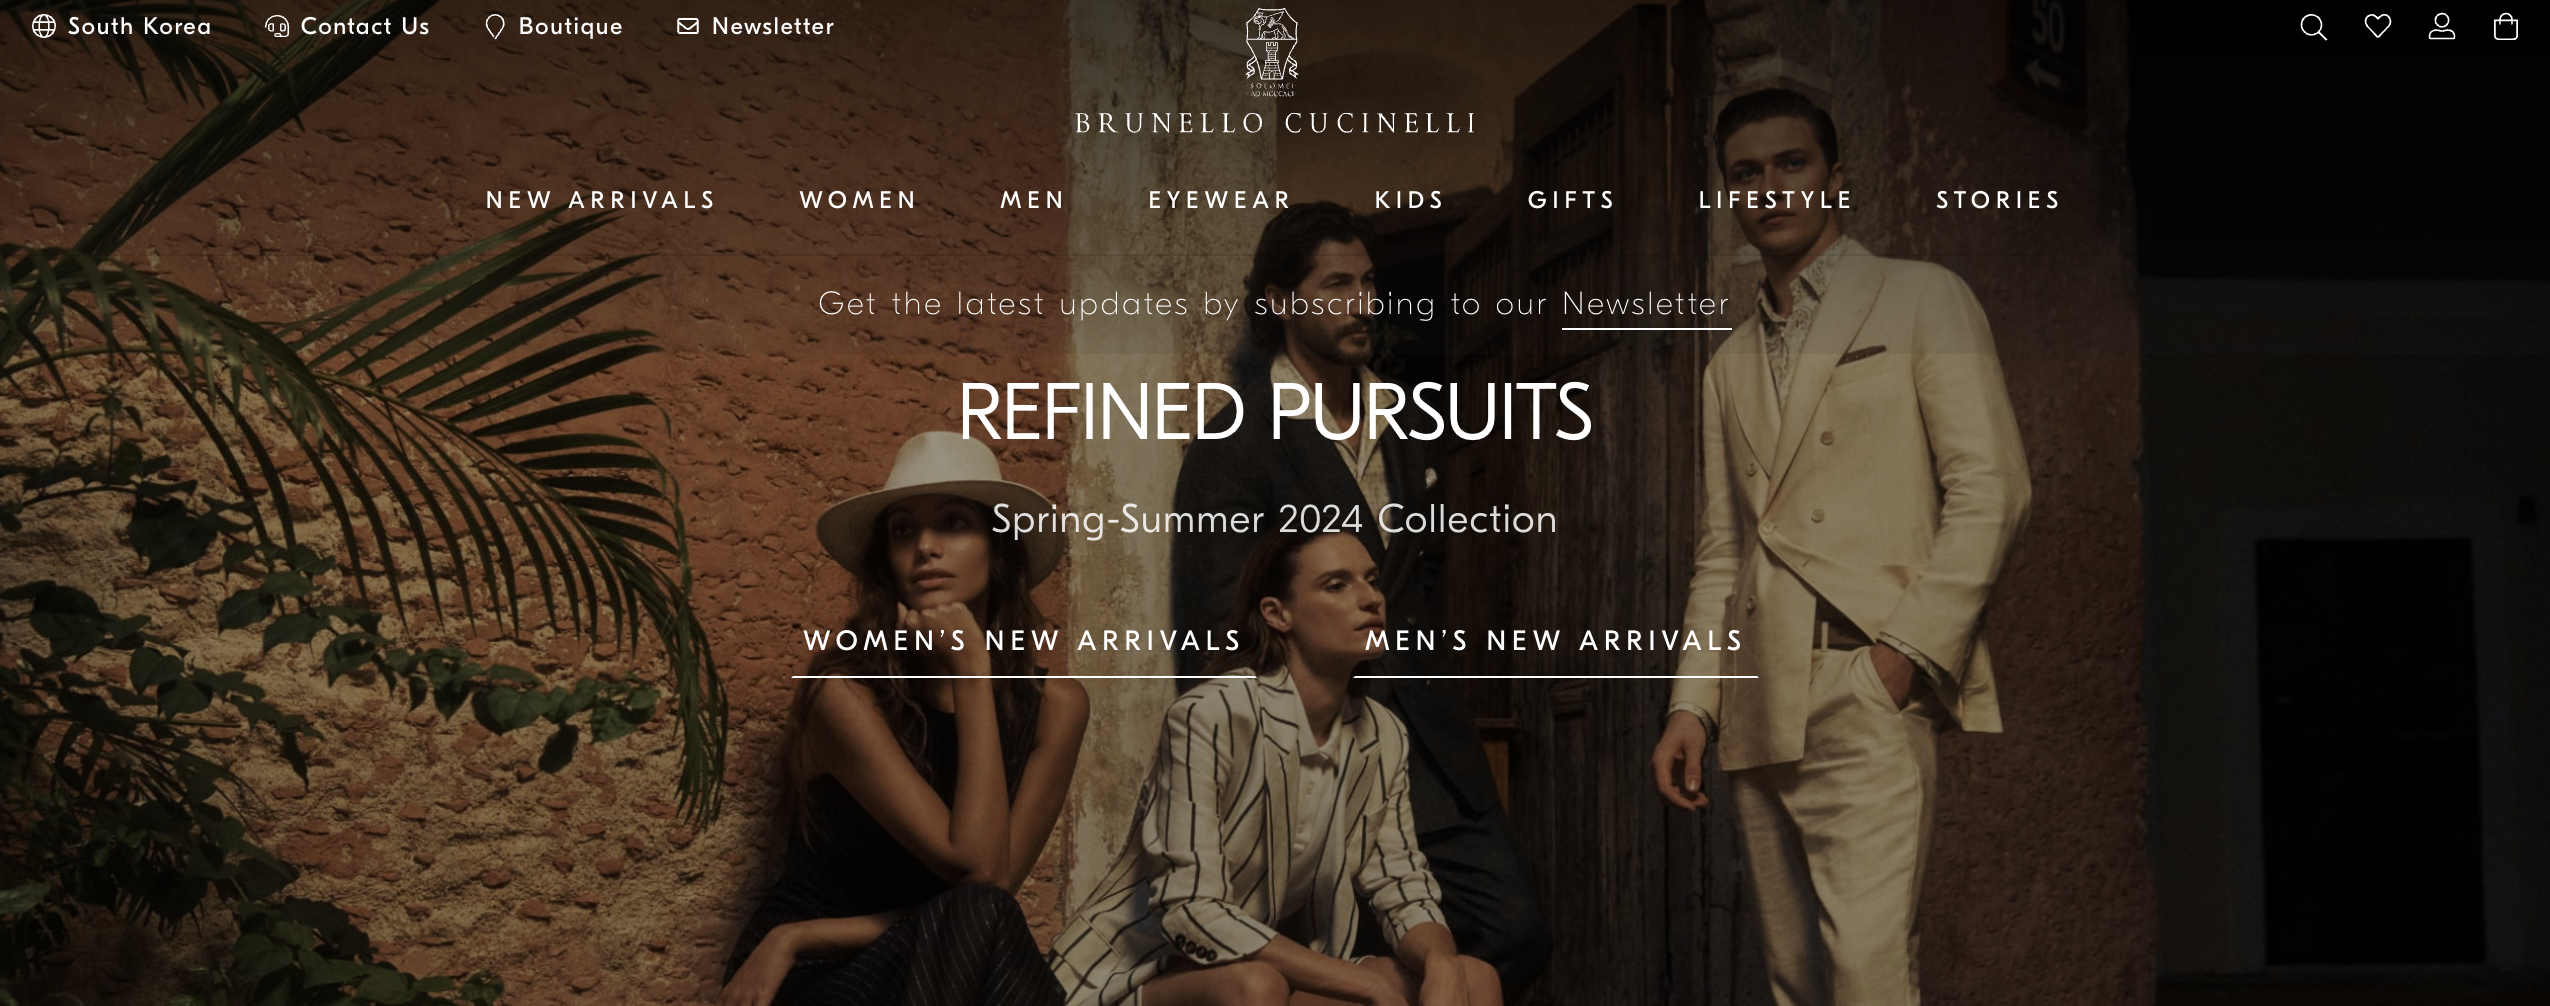 Brunello Cucinelli Reports 26% Revenue Growth Last Year, Says “China Represents a Great Opportunity”